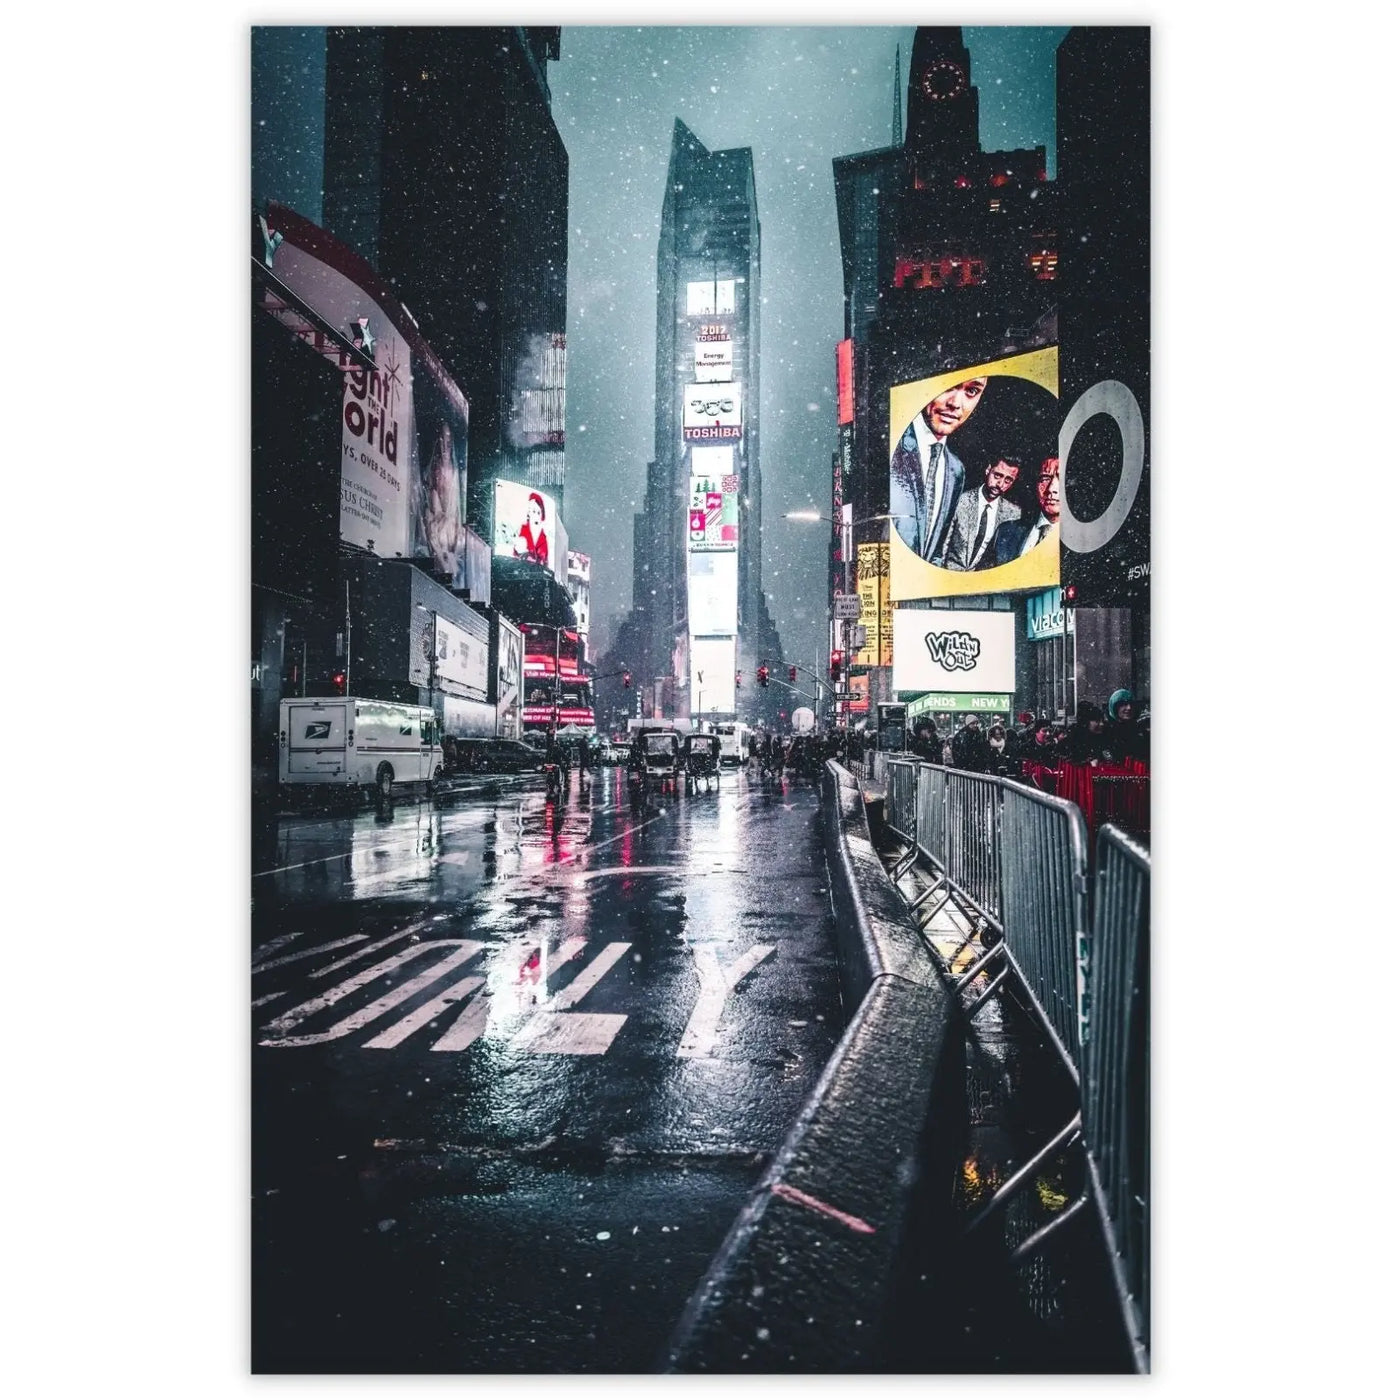 "BROADWAY AT NIGHT" - POSTER - Art For Everyone